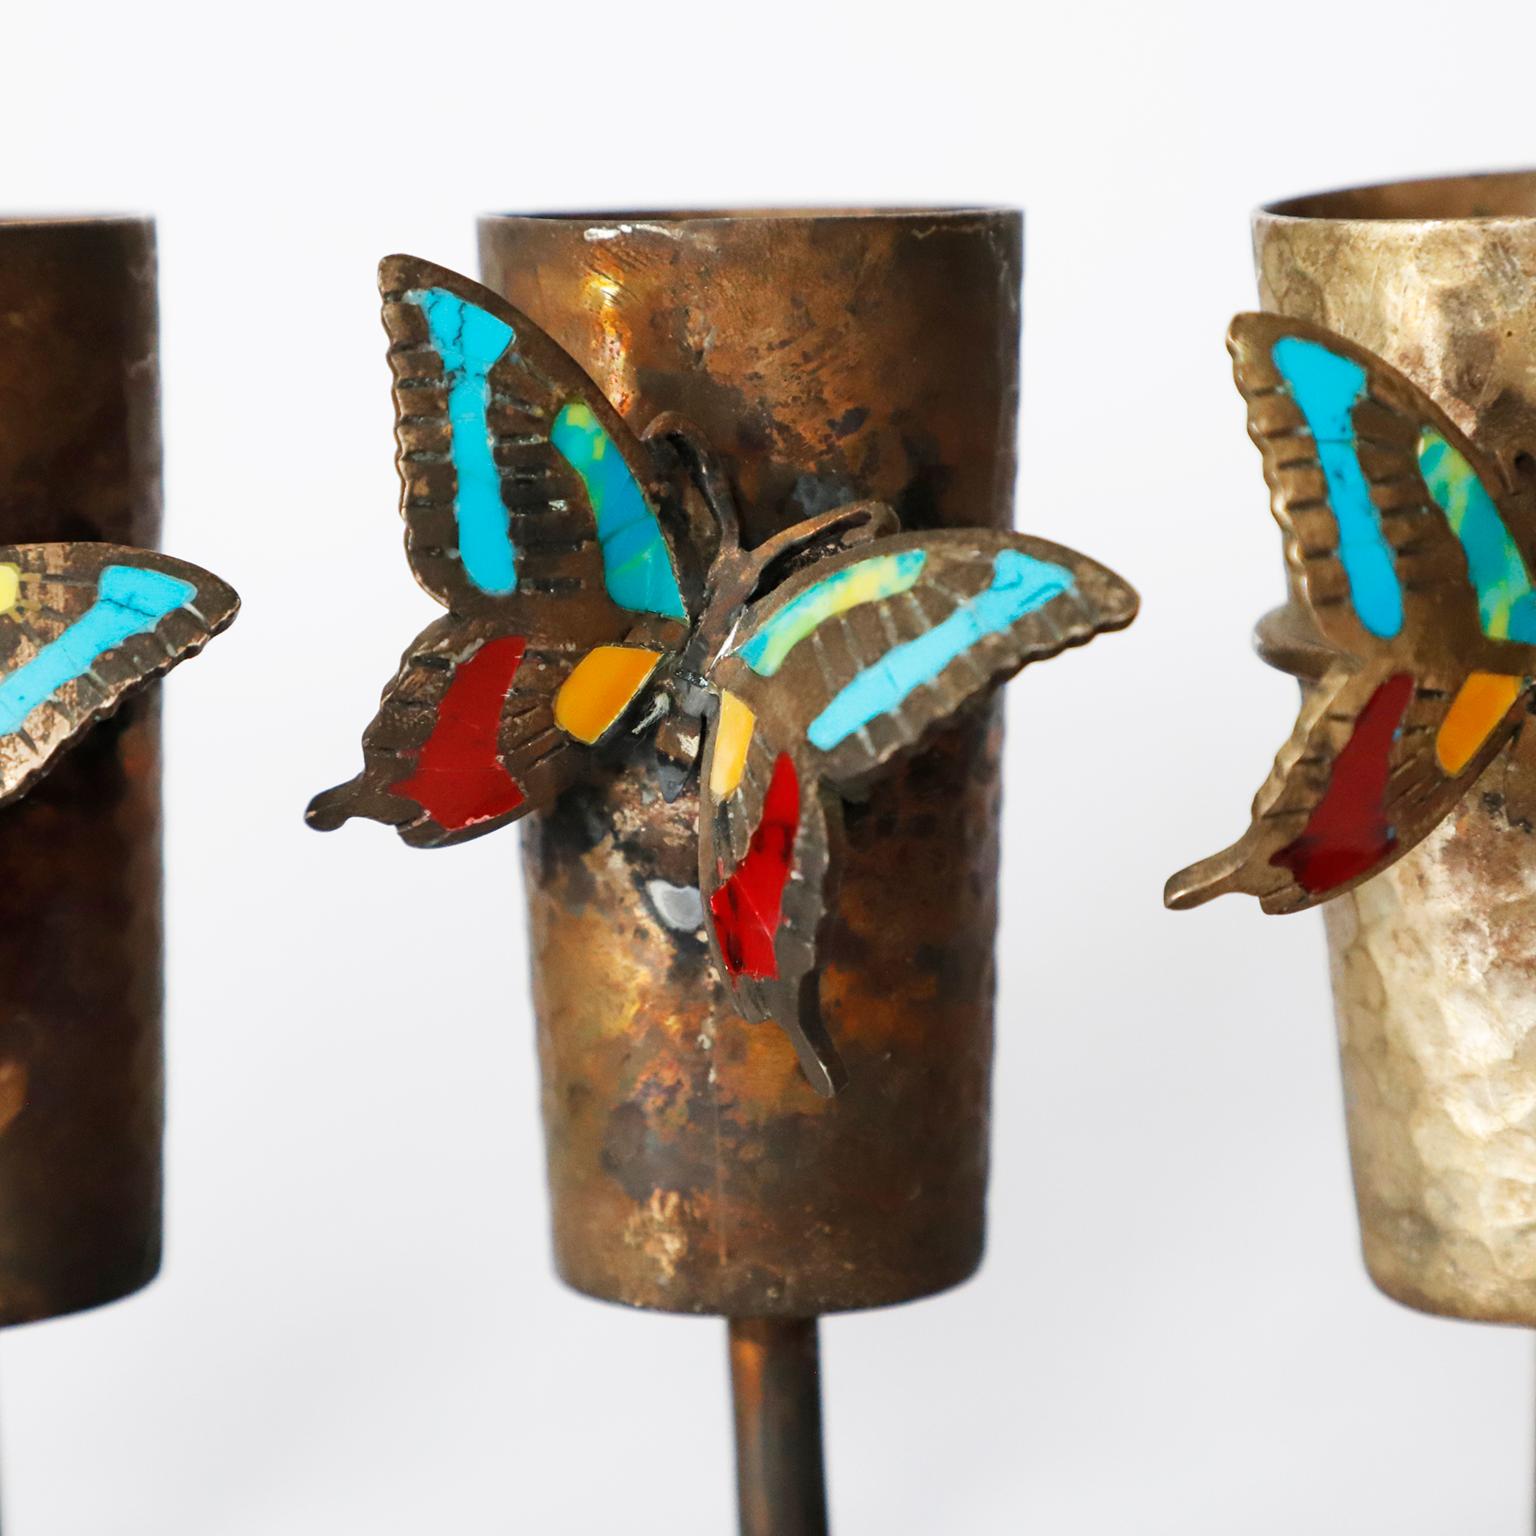 Circa 1960. We offer this mid-century Mexican silver plated cups set in the style of Los Castilllo in great vintage condition and fantastic patina.